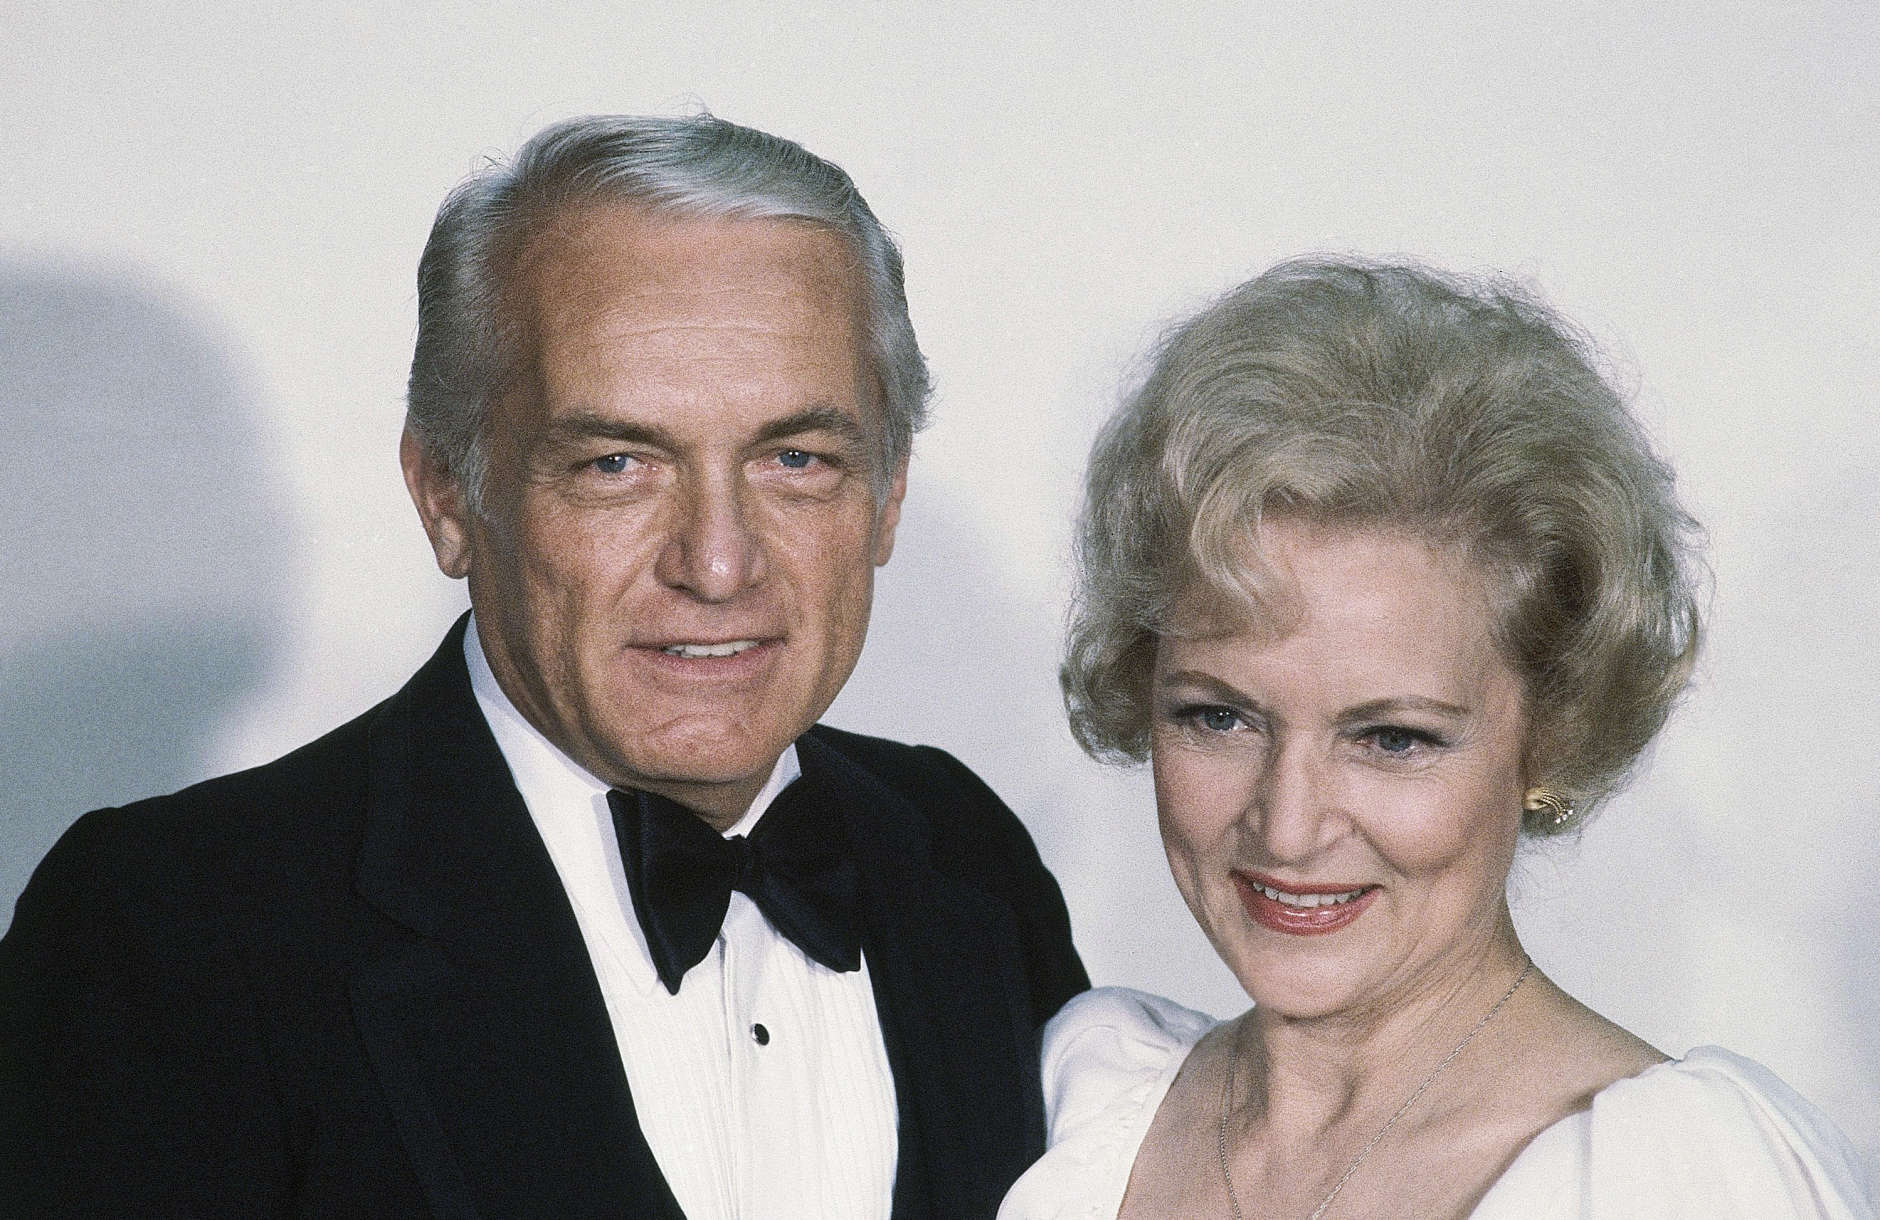 Actress Betty White with Ted Knight at the Emmy Awards in Los Angeles, Sept. 13, 1981. (AP Photo/Randy Rasmussen)